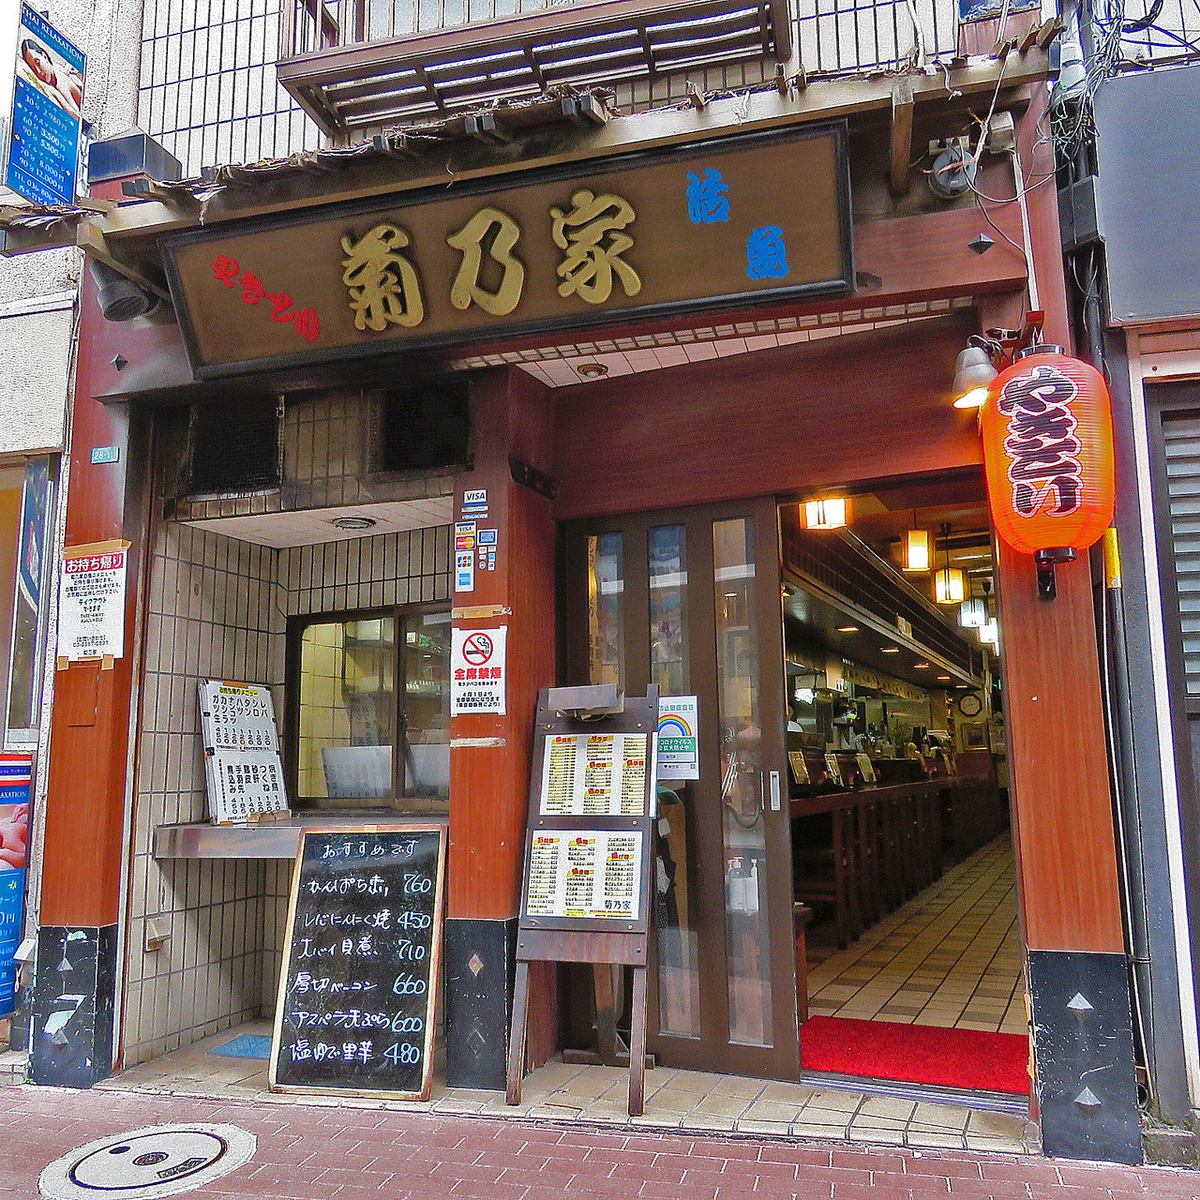 A long-established izakaya that has been in business for over 60 years.It is a store rooted in the local area.